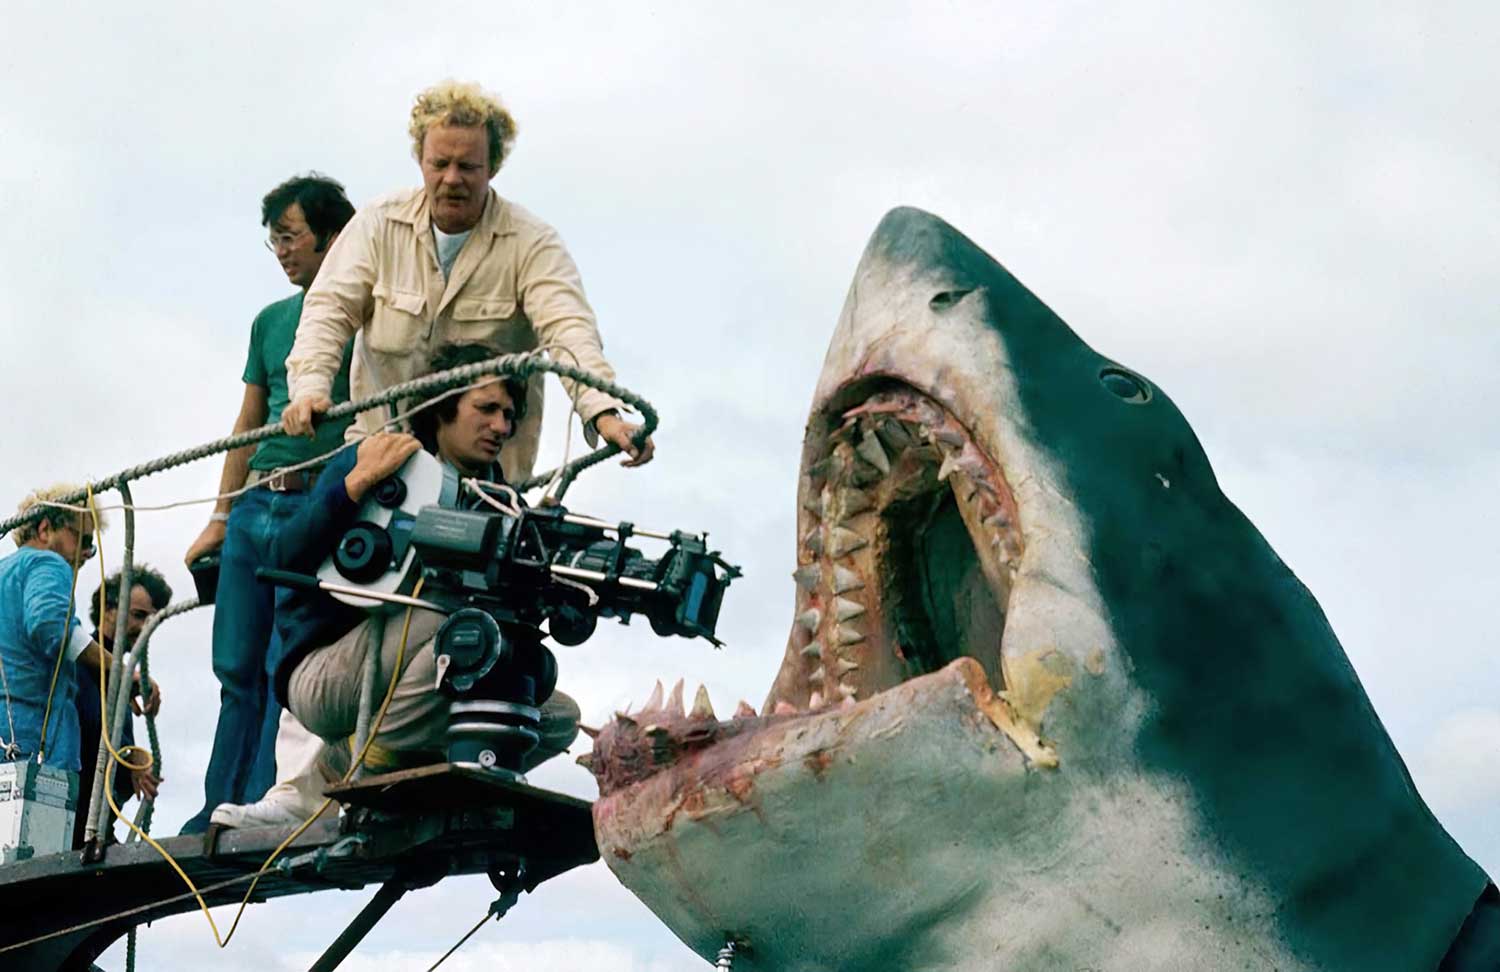 Steven Spieberg crouches on a crane pointing a camera into the mouth of a fake shark as four other men stand behind him.